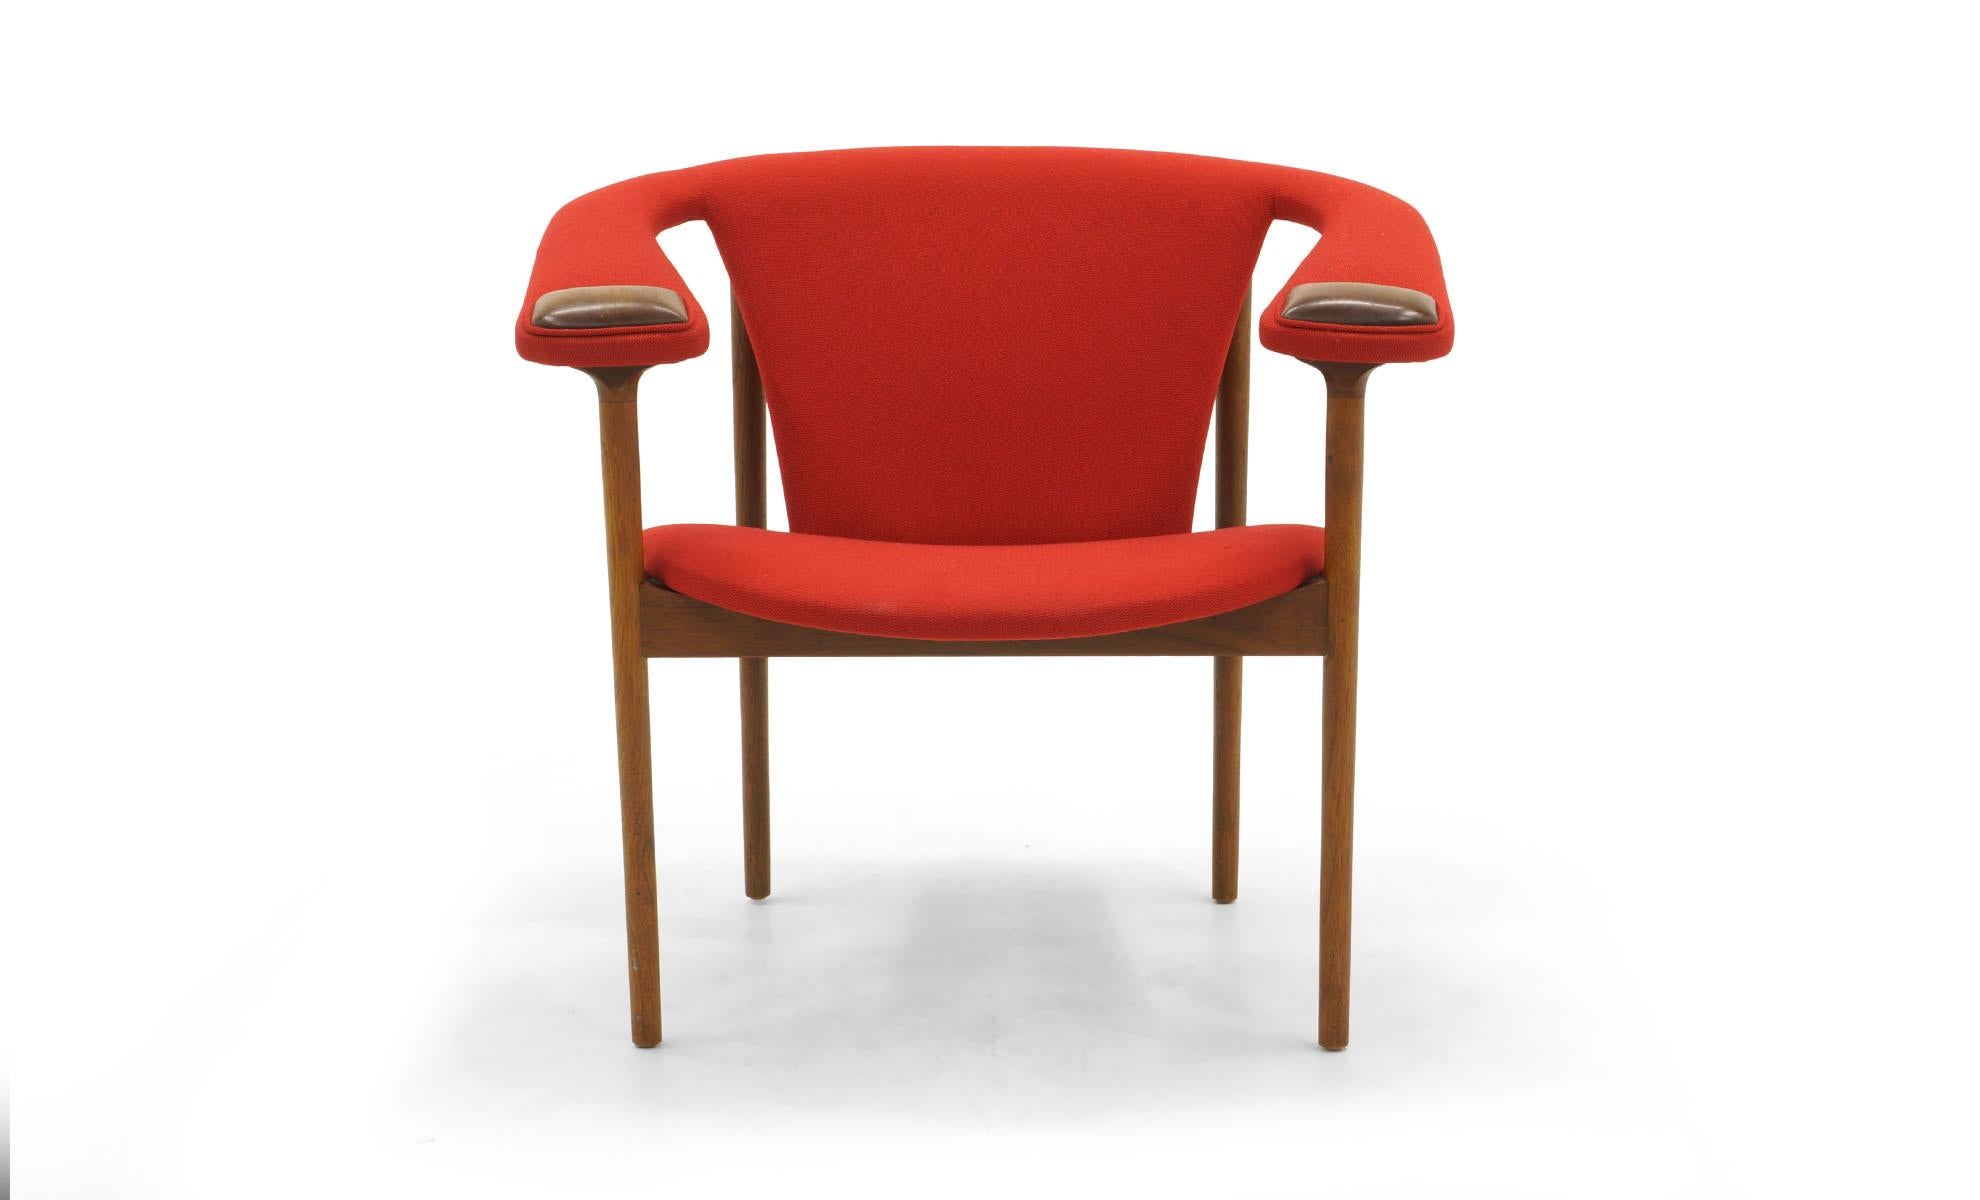 Rare accent armchair designed by Adrian Pearsall for Craft Associates. Beautifully and expertly restored and reupholstered in red Knoll wool blend fabric. This might be our favorite Pearsall chair design.